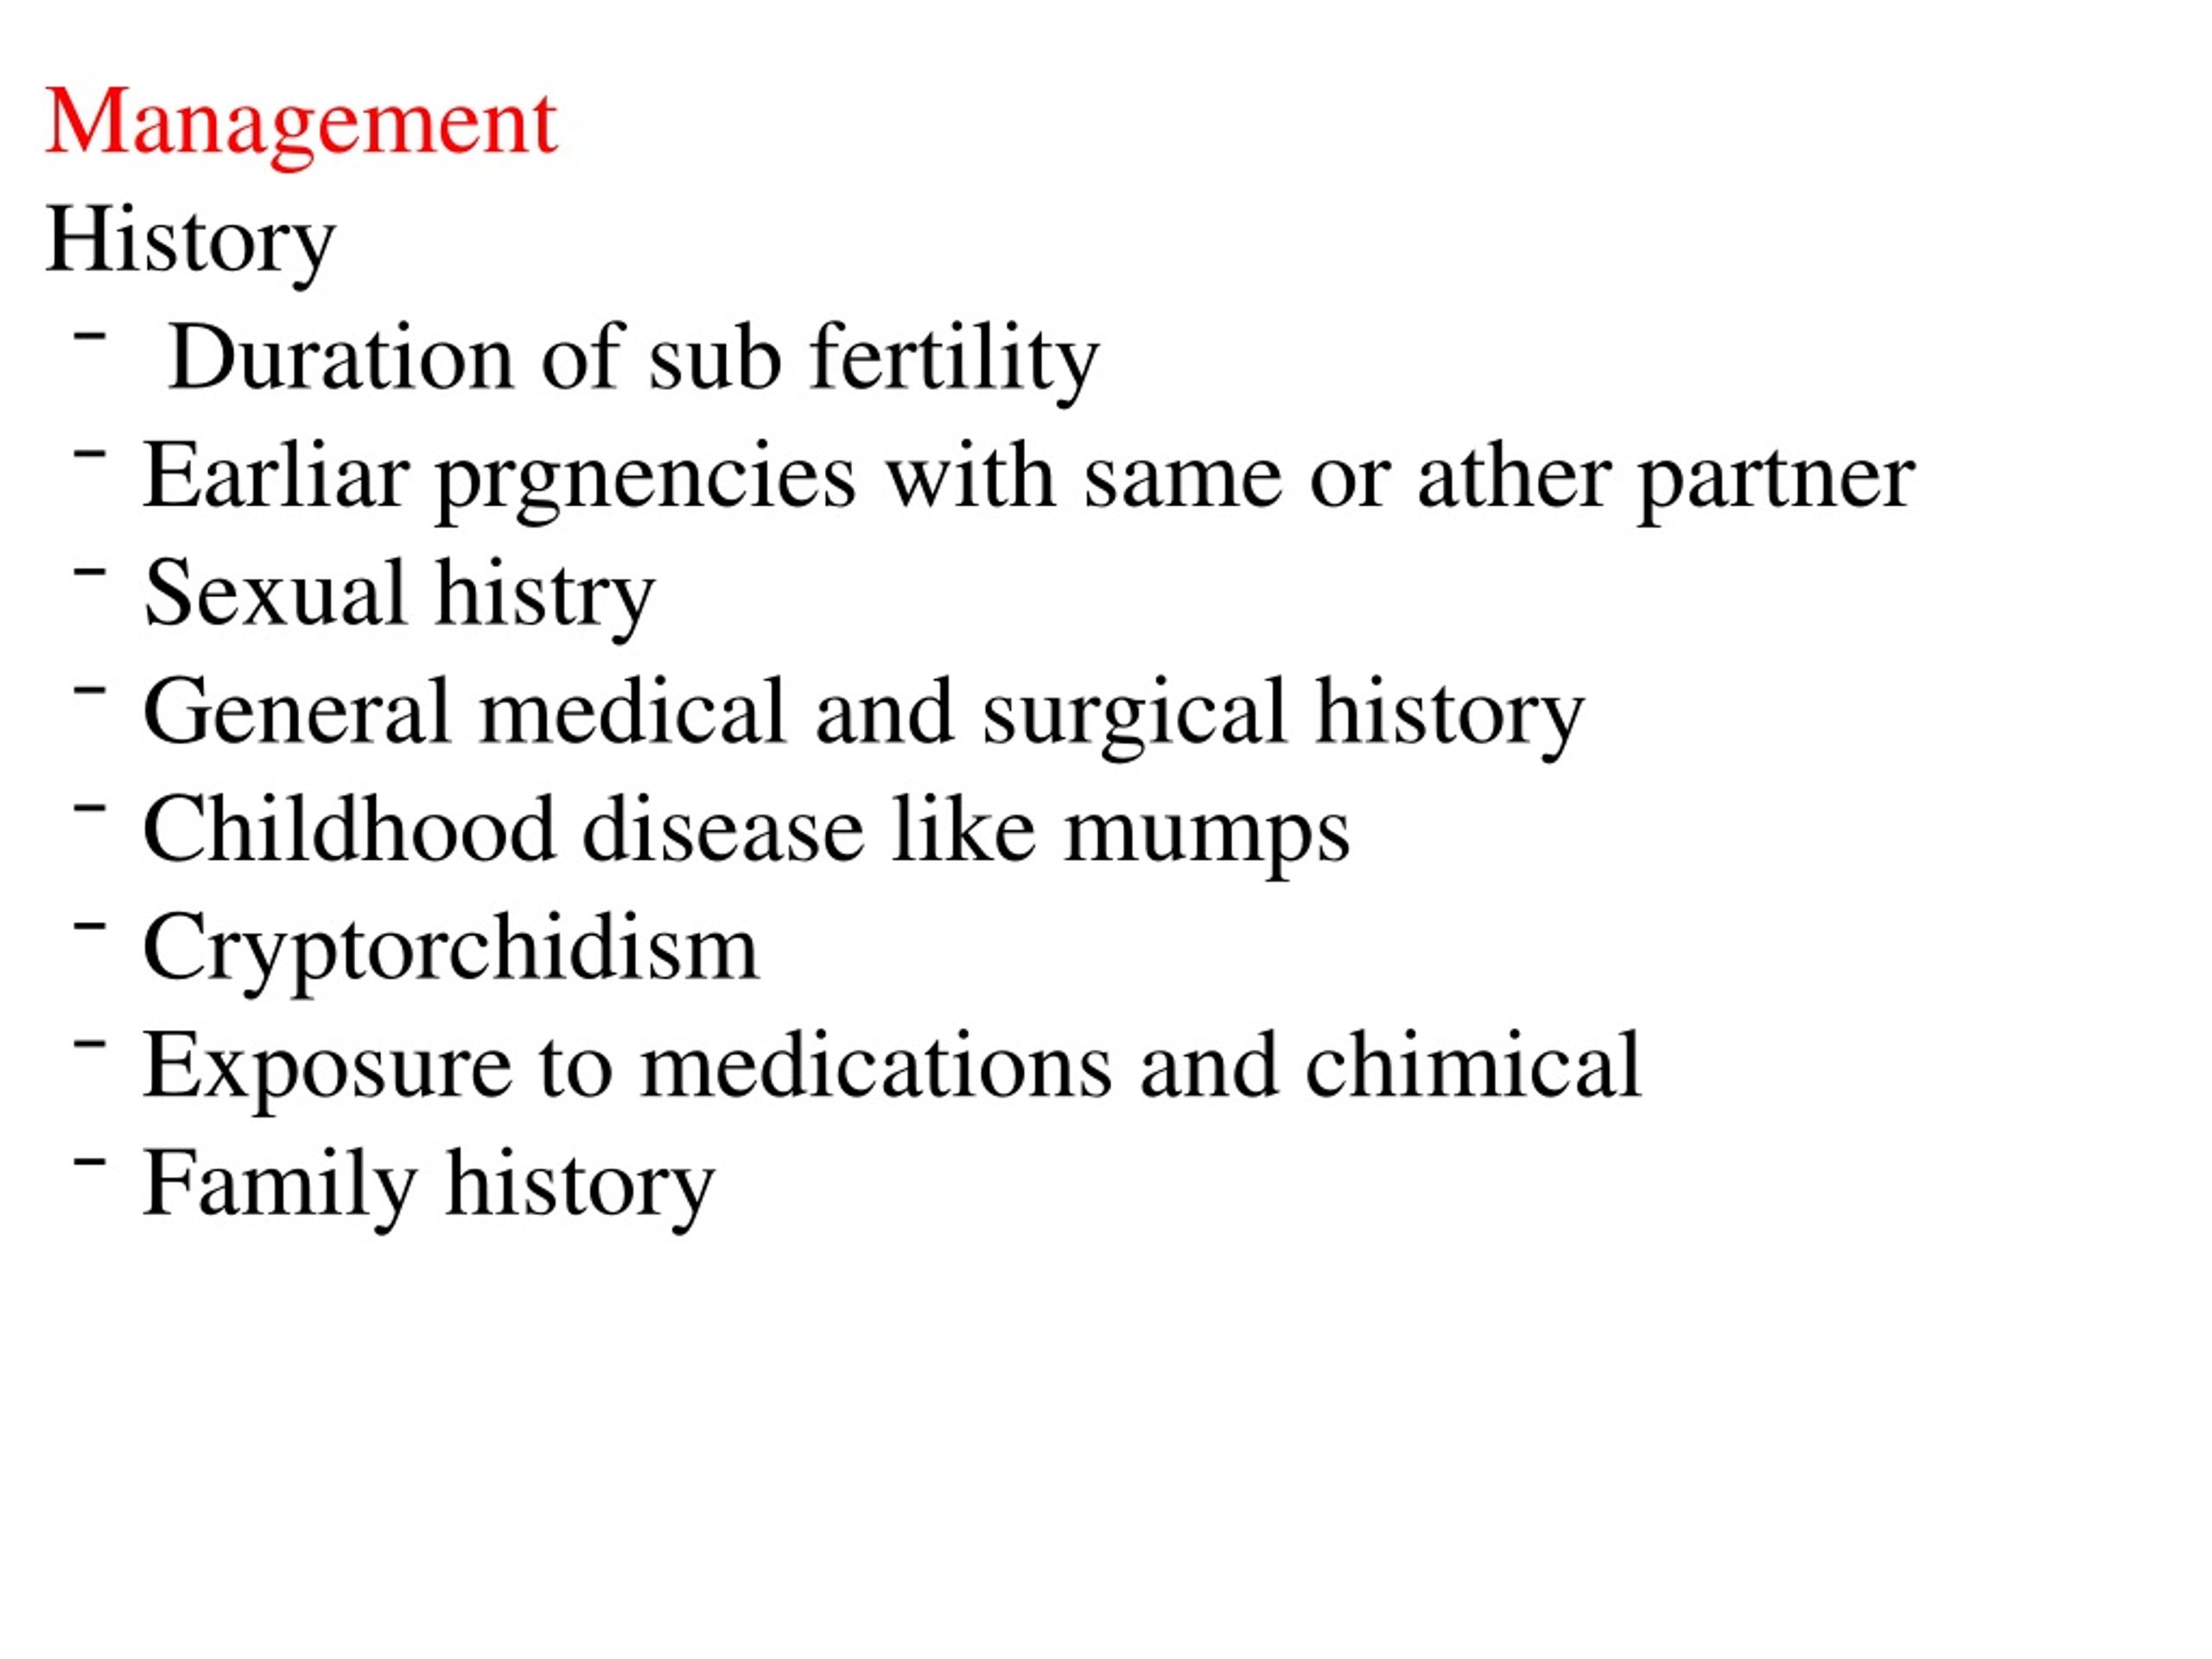 Ppt Male Subfertility Powerpoint Presentation Free Download Id 8592797